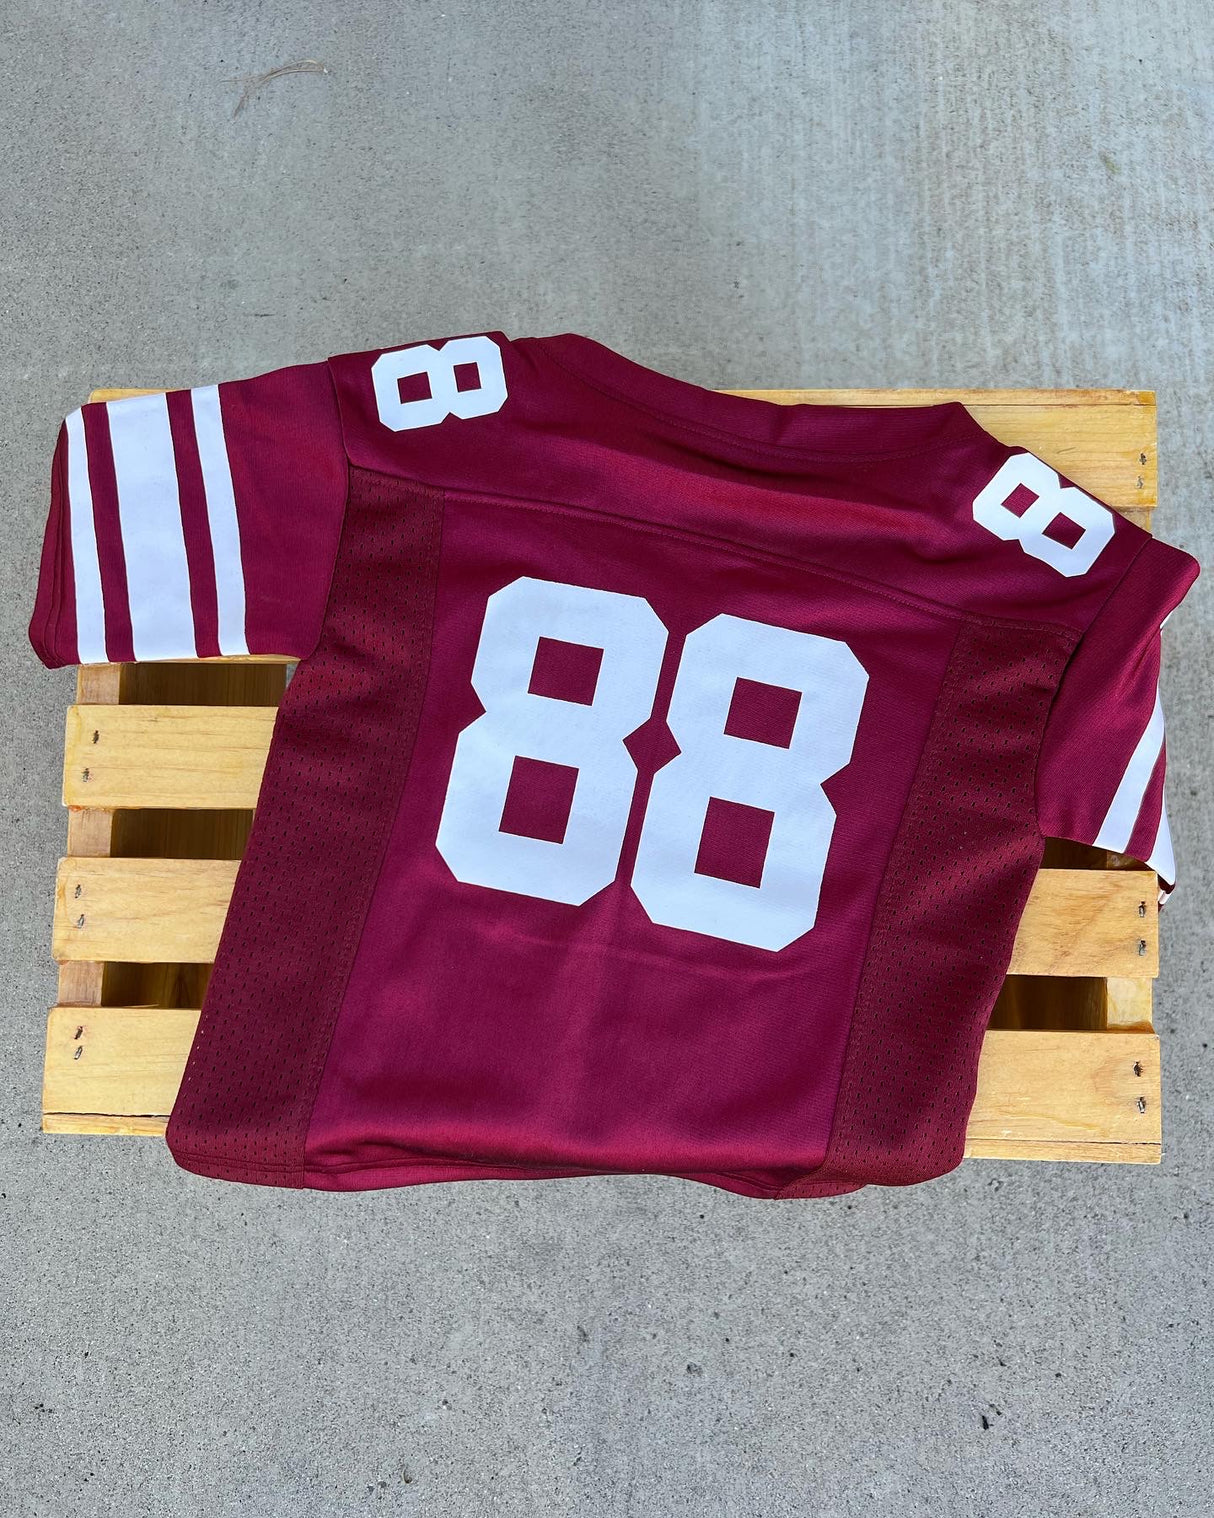 YOUTH NM STATE "GAME DAY" FOOTBALL JERSEY